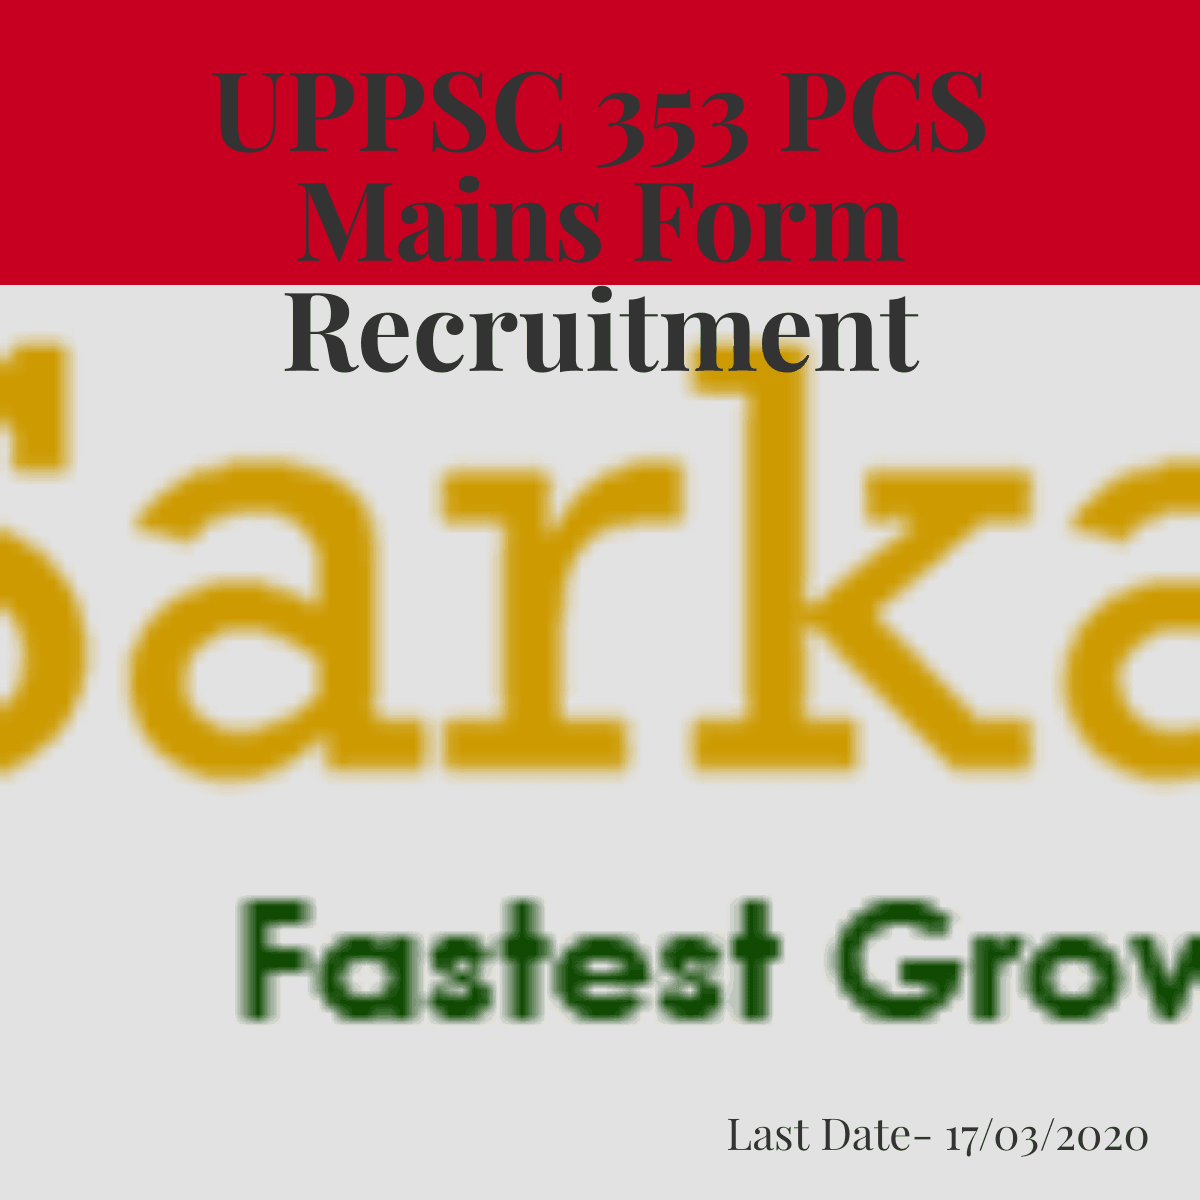 UPPSC Recruitment 2019 For State Subordinate Services and Other Post Govt Job